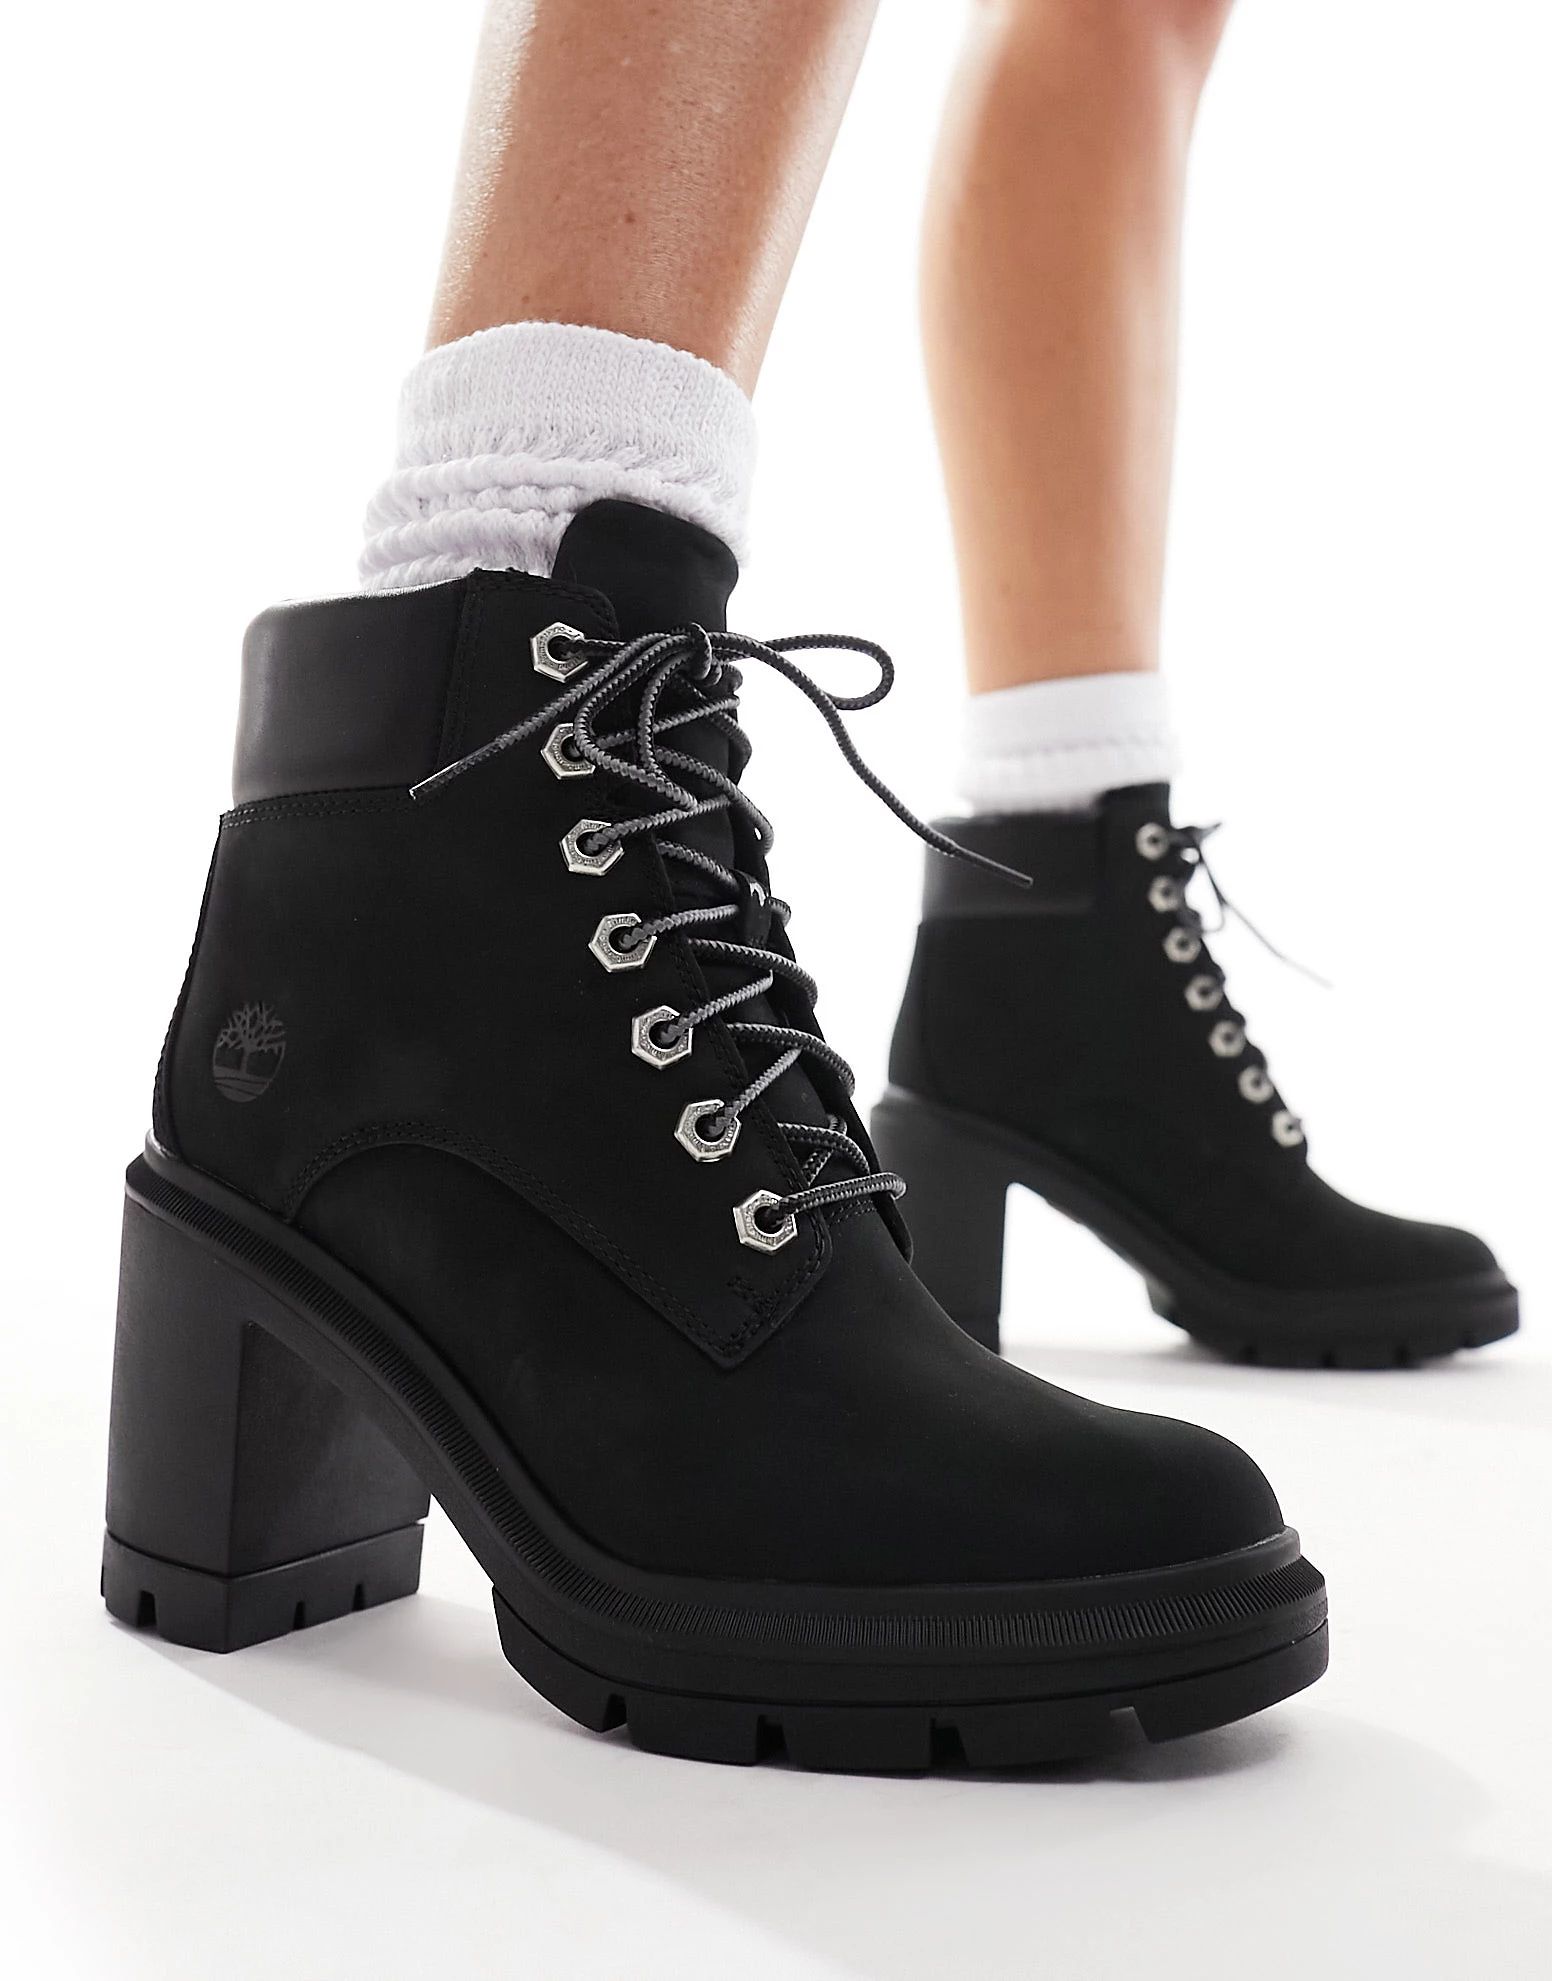 Timberland allington heights 6 inch heeled boots in black nubuck leather | ASOS (Global)